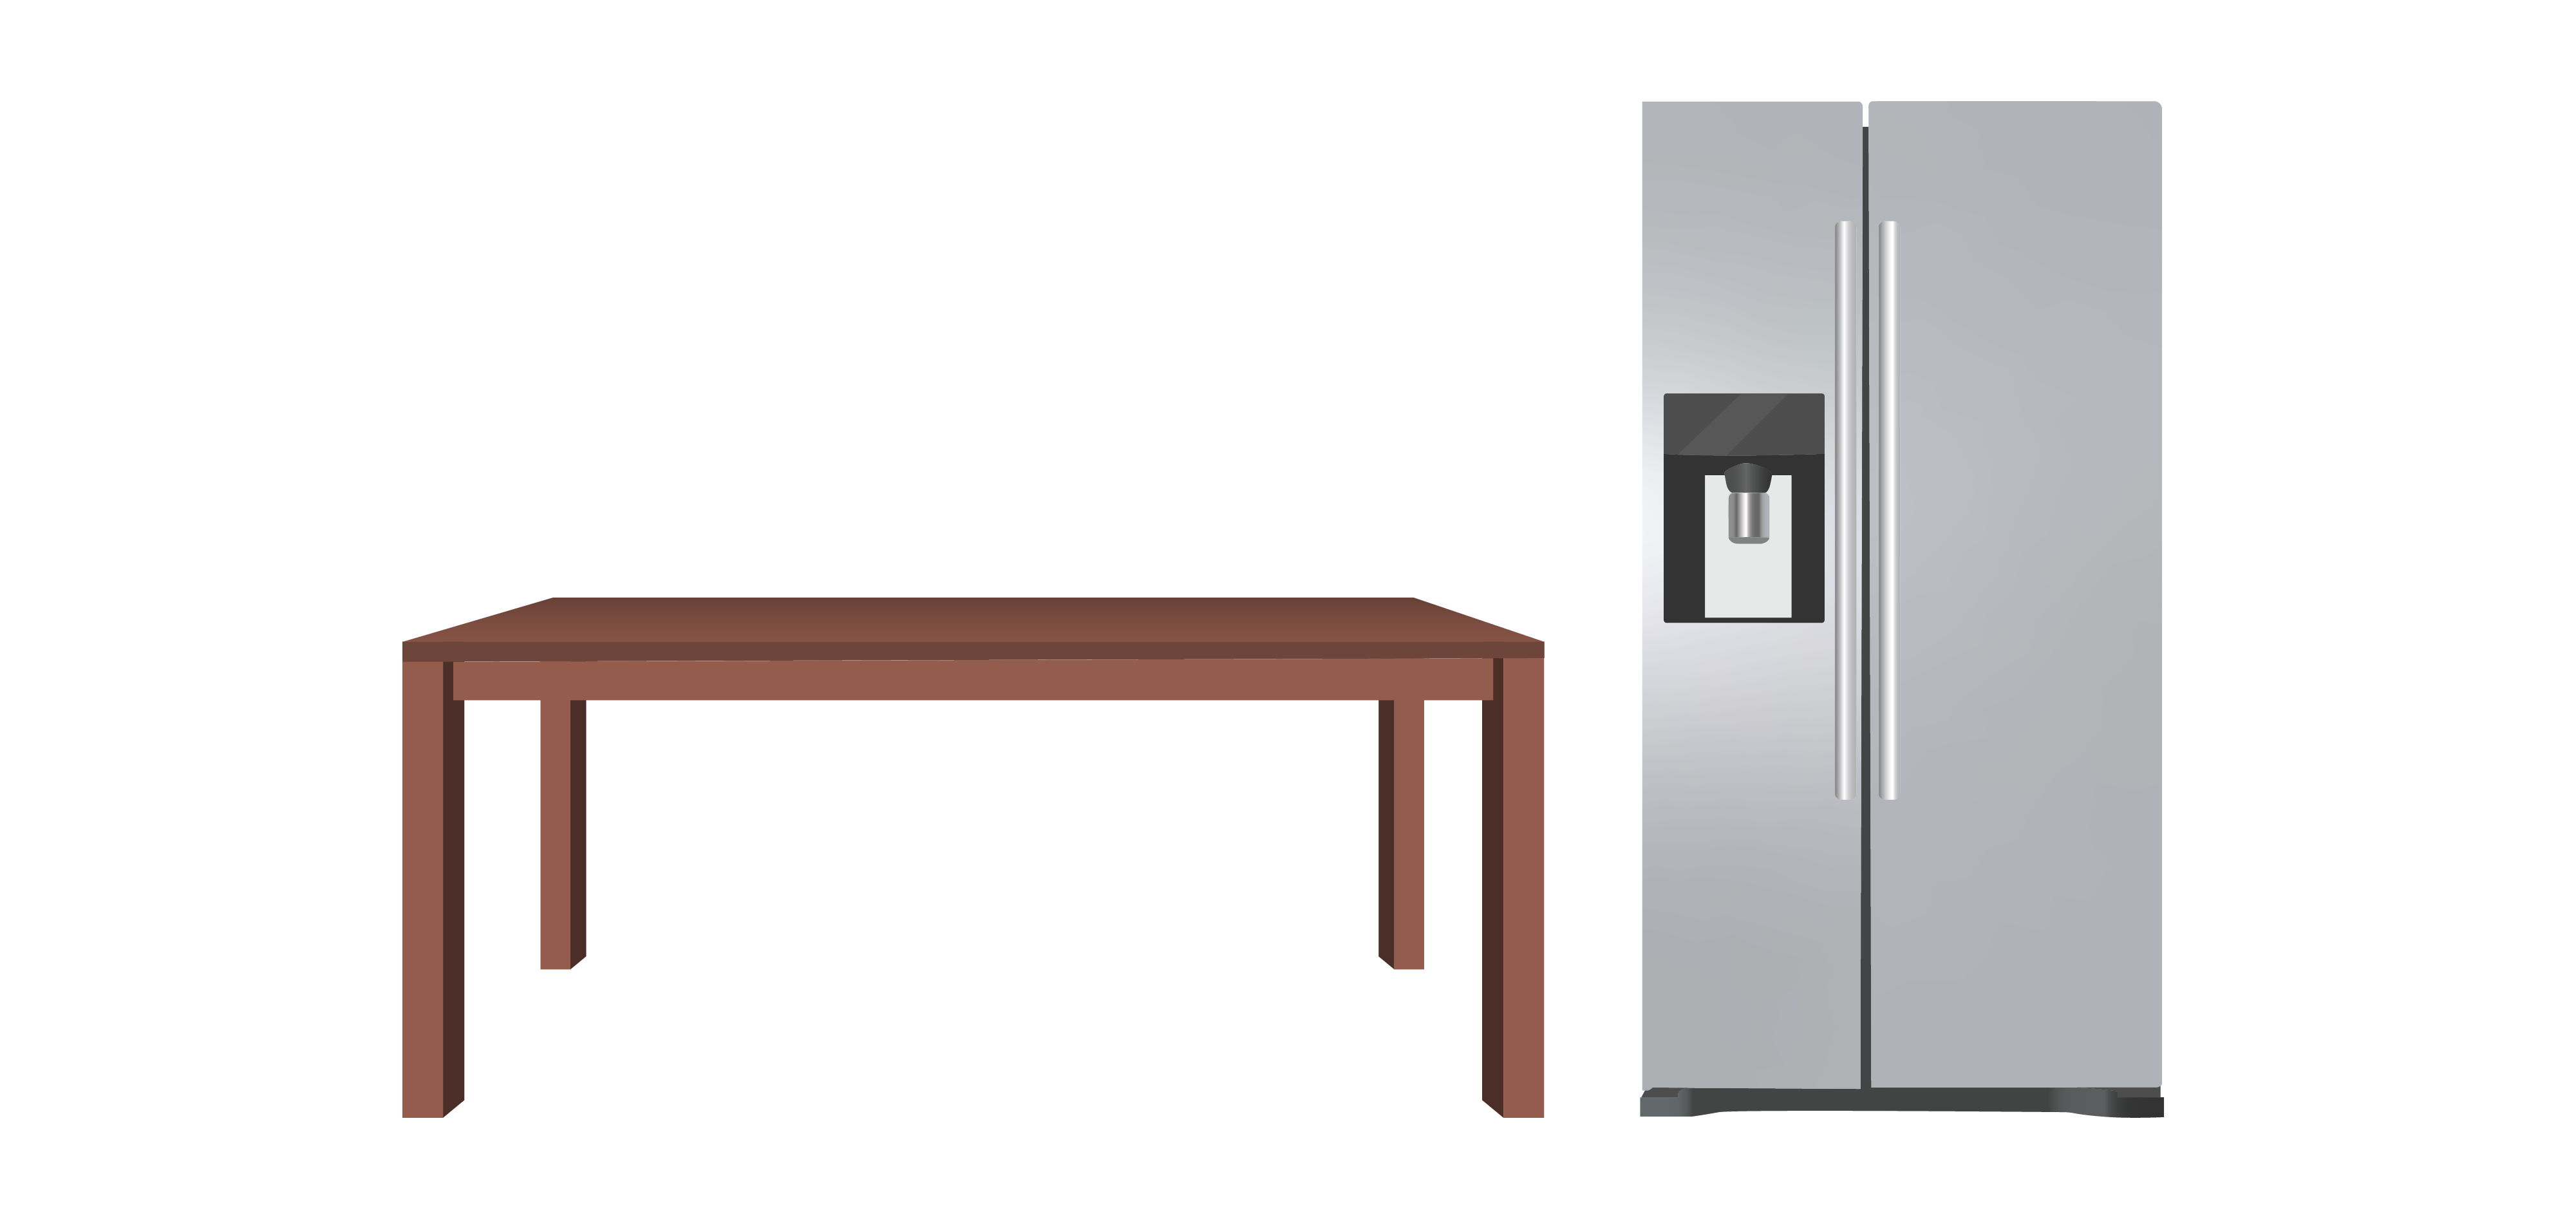 On the left is a simple, brown, wooden table. On the right is a silver stainless steel refrigerator.